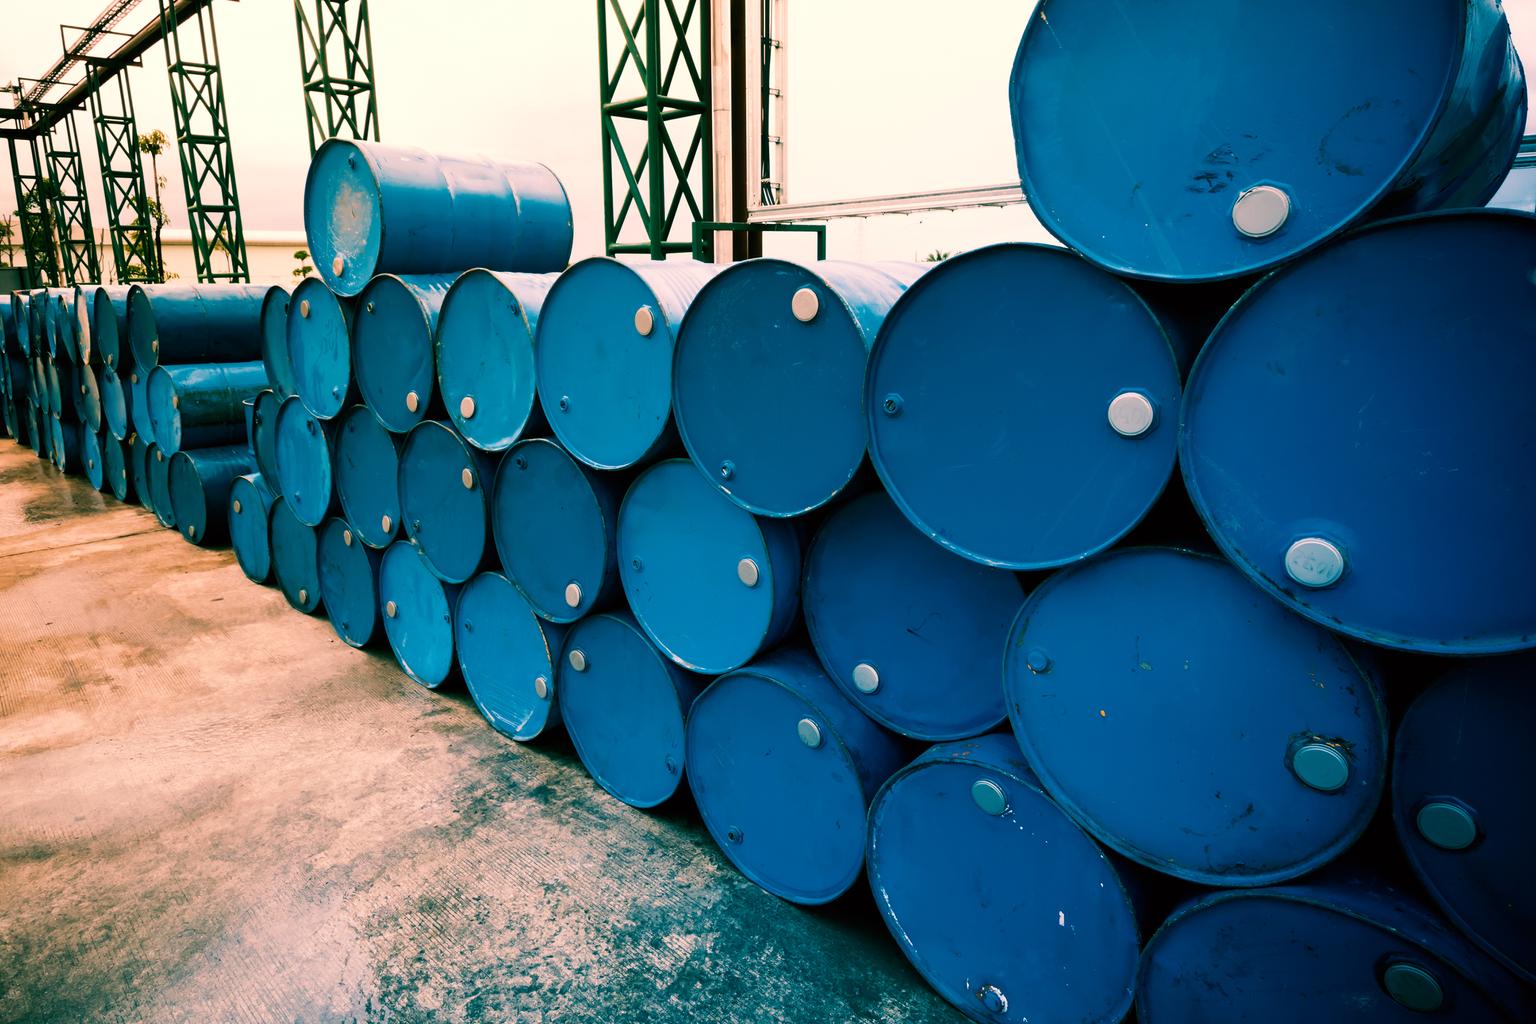 Industry oil barrels or chemical drums stacked up. Fillter image processed.